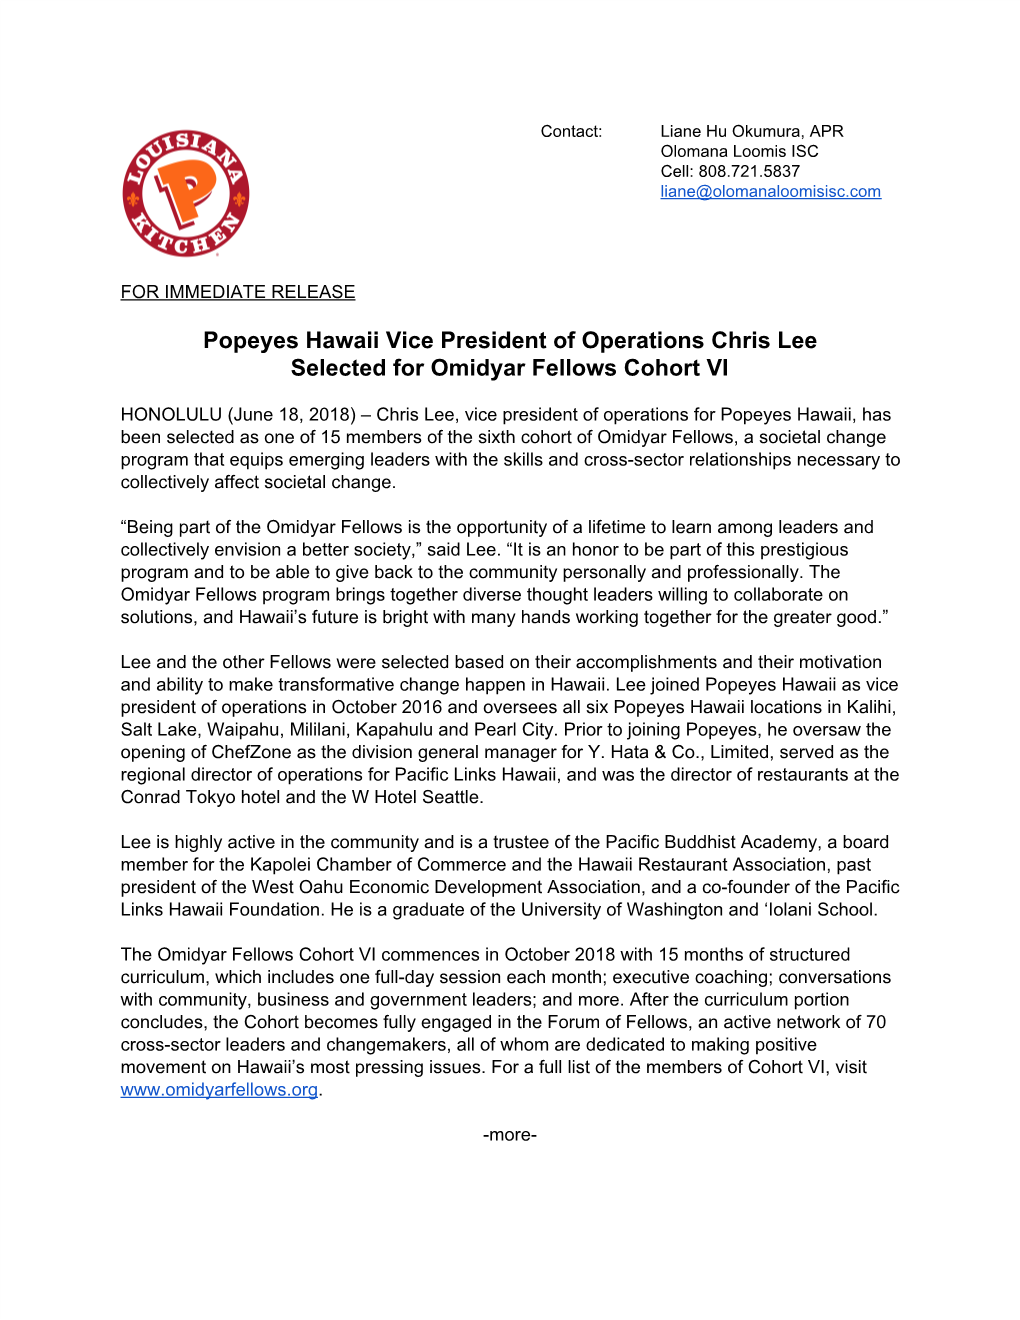 Popeyes Hawaii Vice President of Operations Chris Lee Selected for Omidyar Fellows Cohort VI